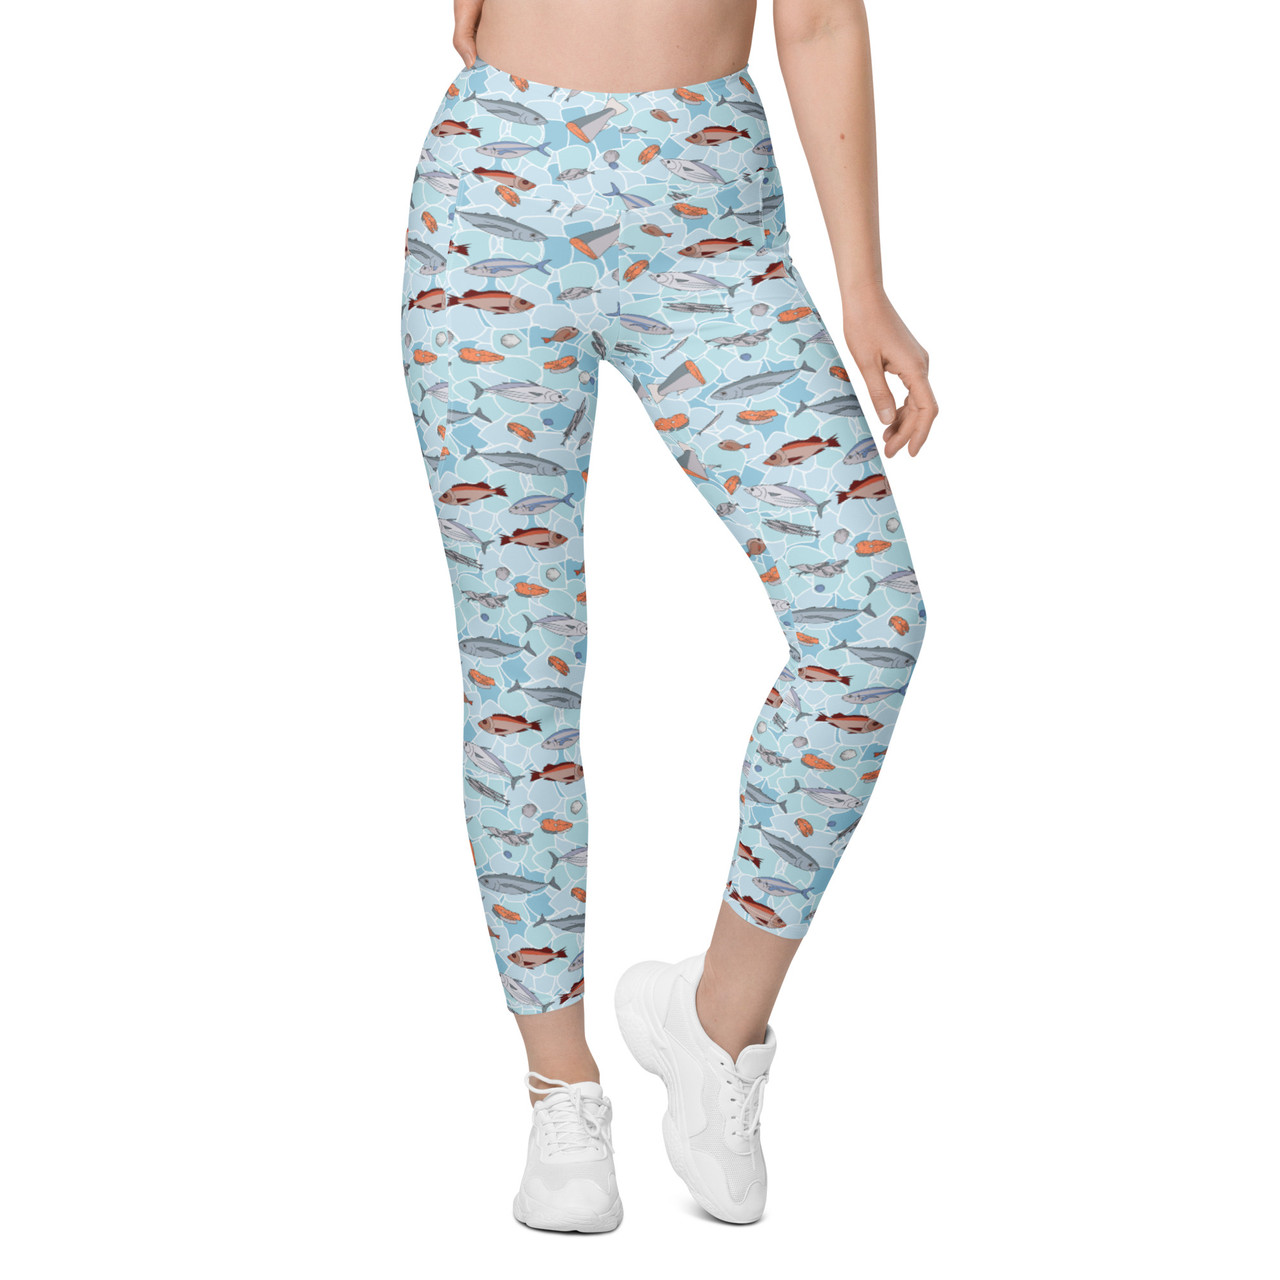 Blue Fish Scale Leggings with pockets UPF 50+